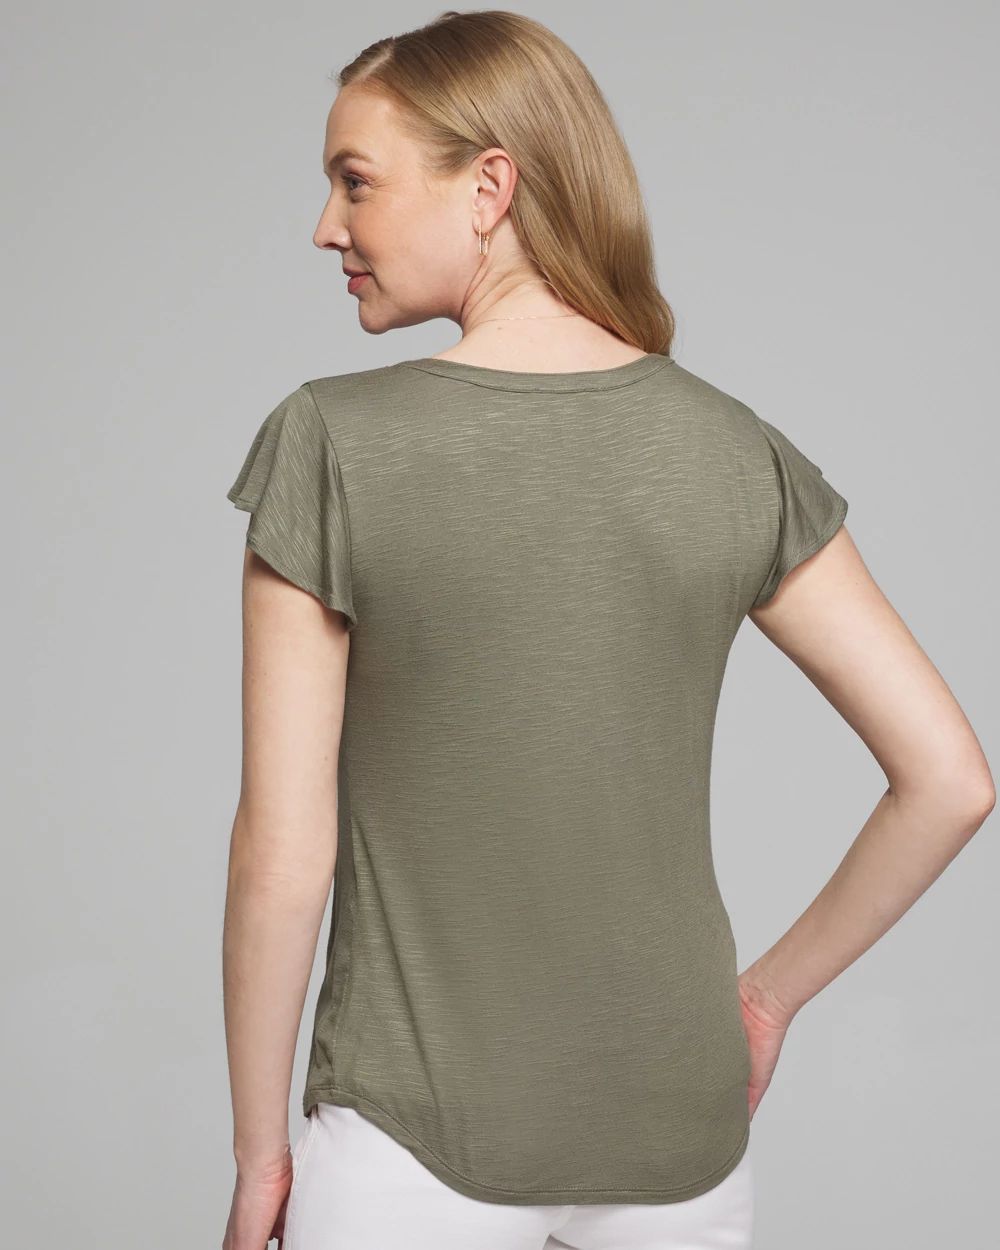 Outlet WHBM Ruffle Tee click to view larger image.